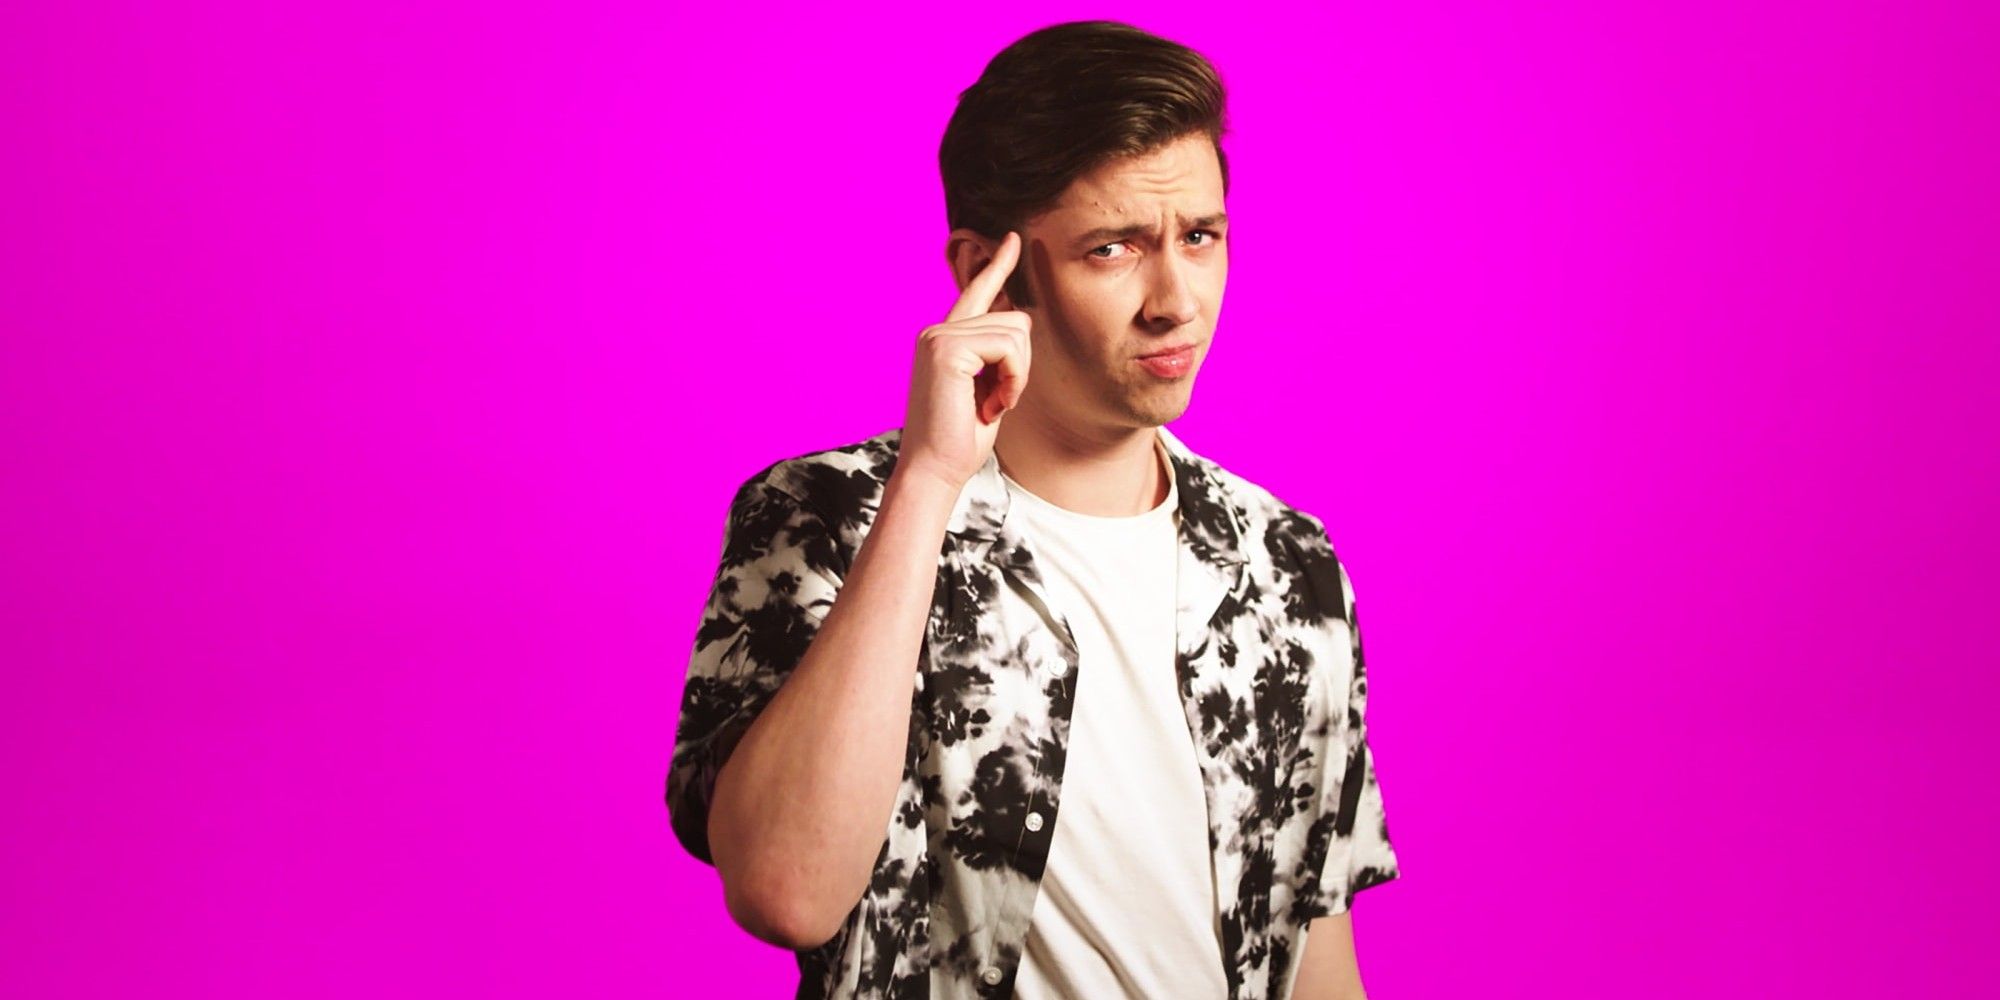 A headshot of Jack from The Circle, finger to his temple, with a purple-pink background.